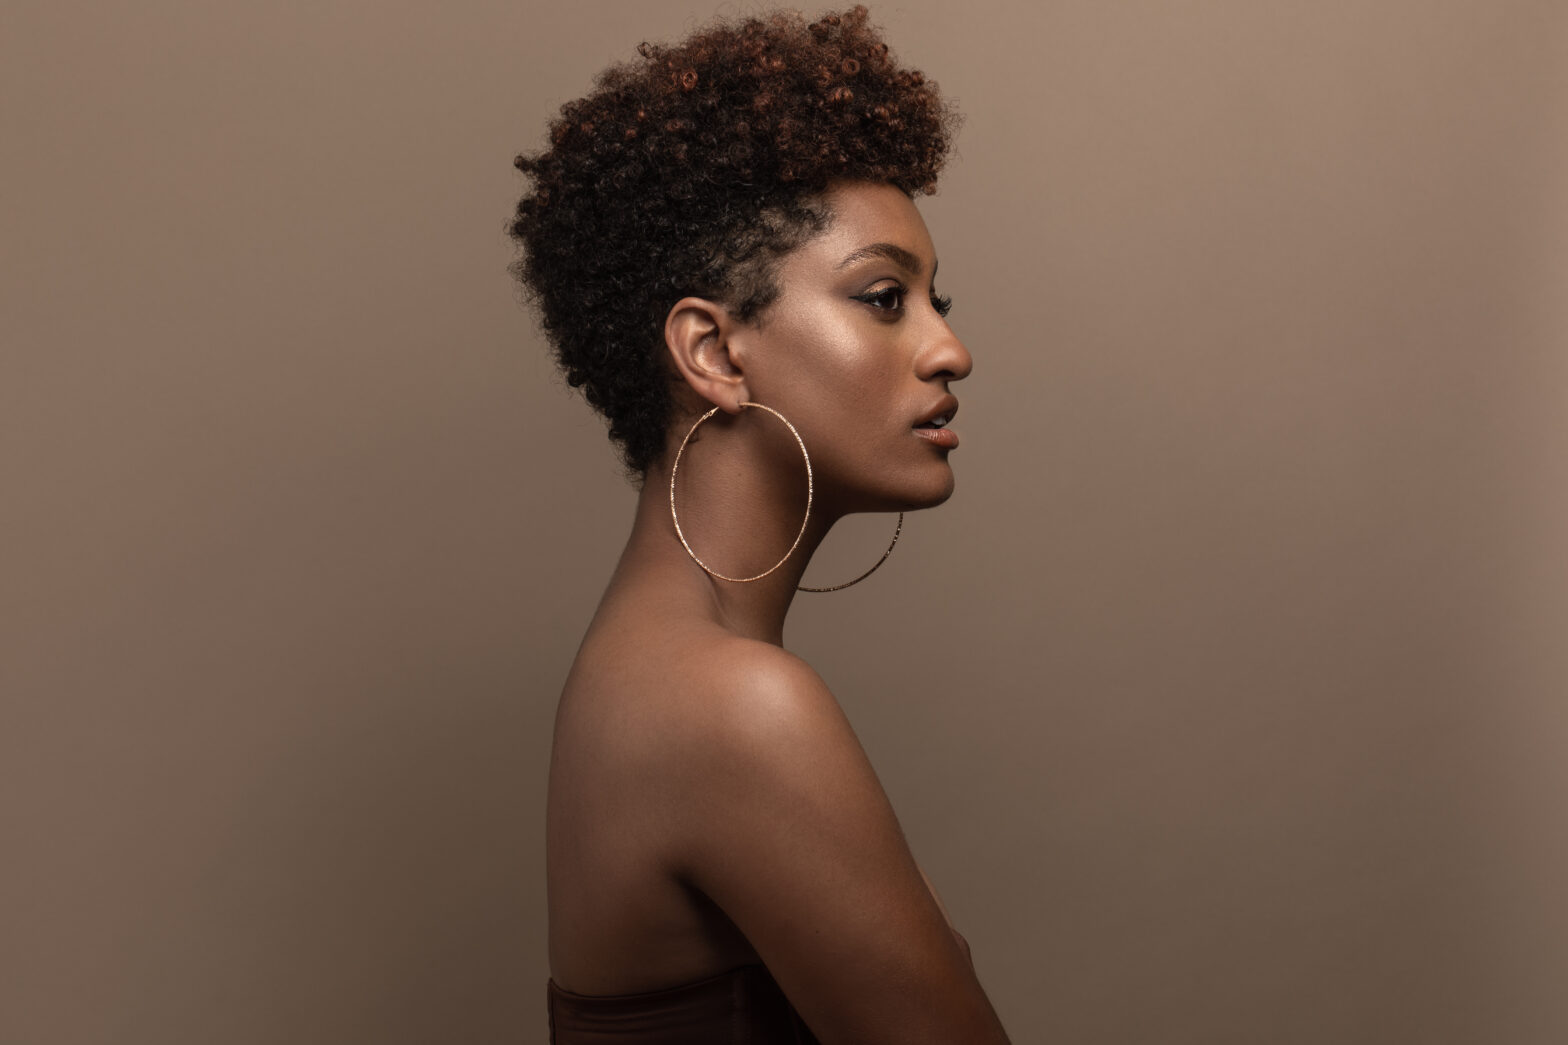 Elegant Black woman's profile with a short hairstyle. Short haircuts for women may be what's in order this winter season. Prepare now with these inspired looks. Read on for more.